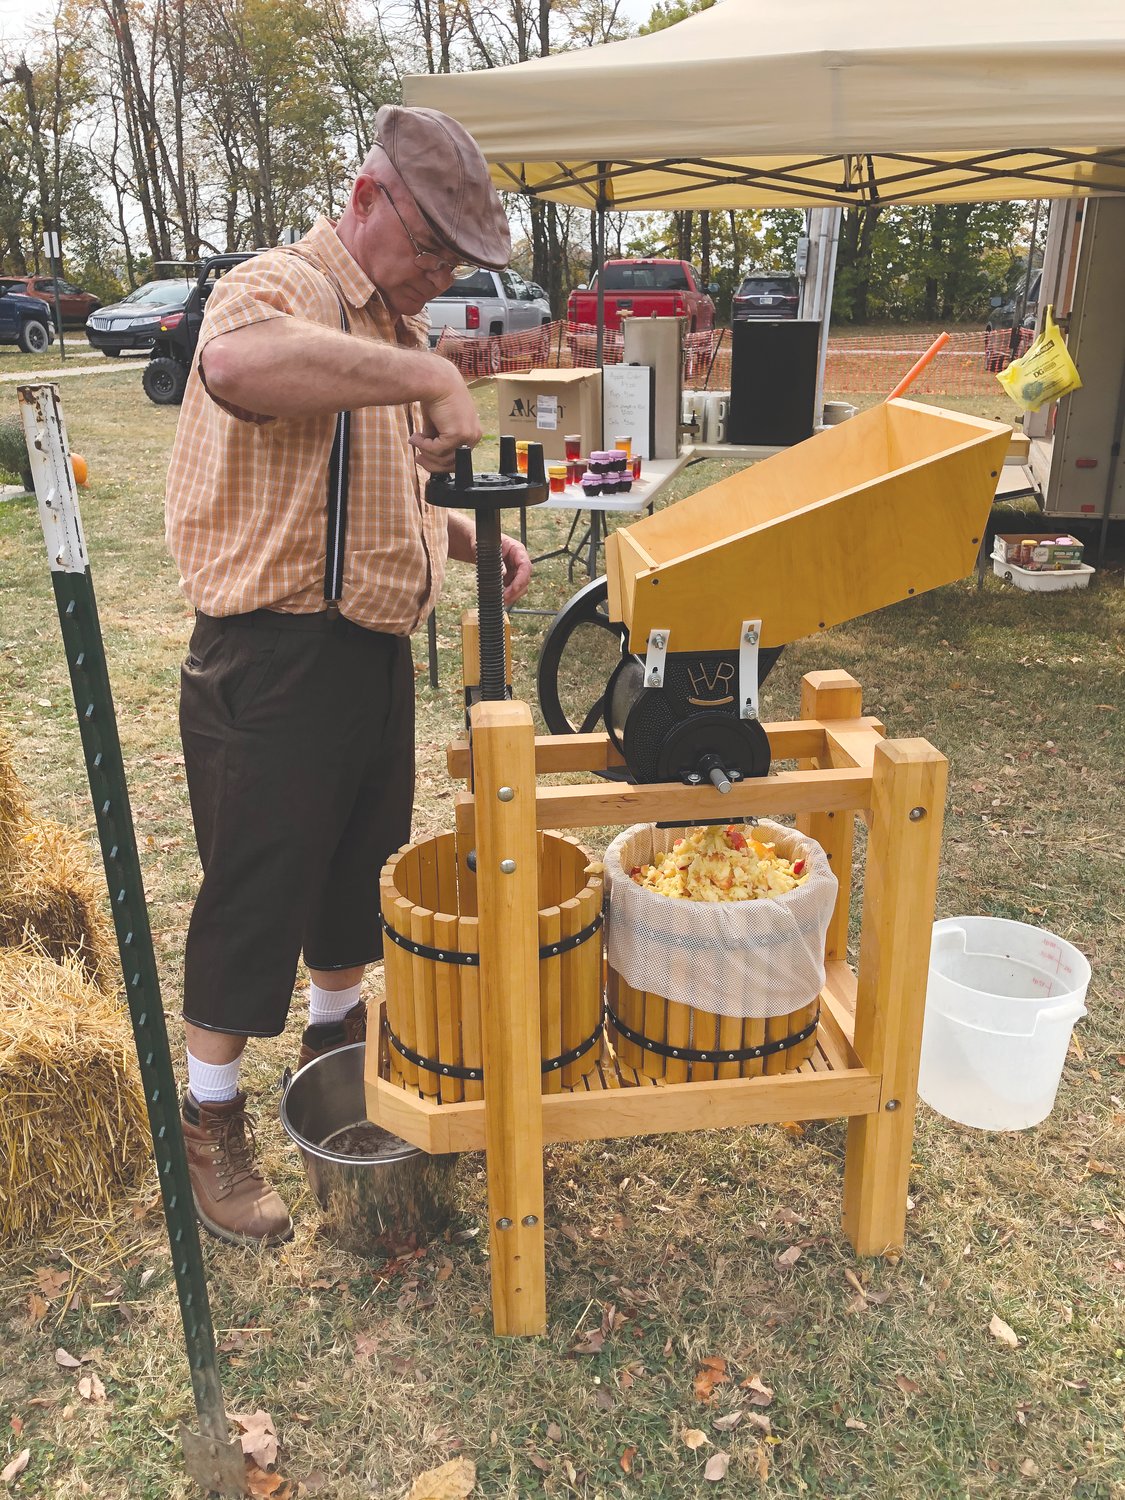 Phil Pirtle uses a press to make fresh apple cider on Saturday at the Waynetown Oktoberfest.